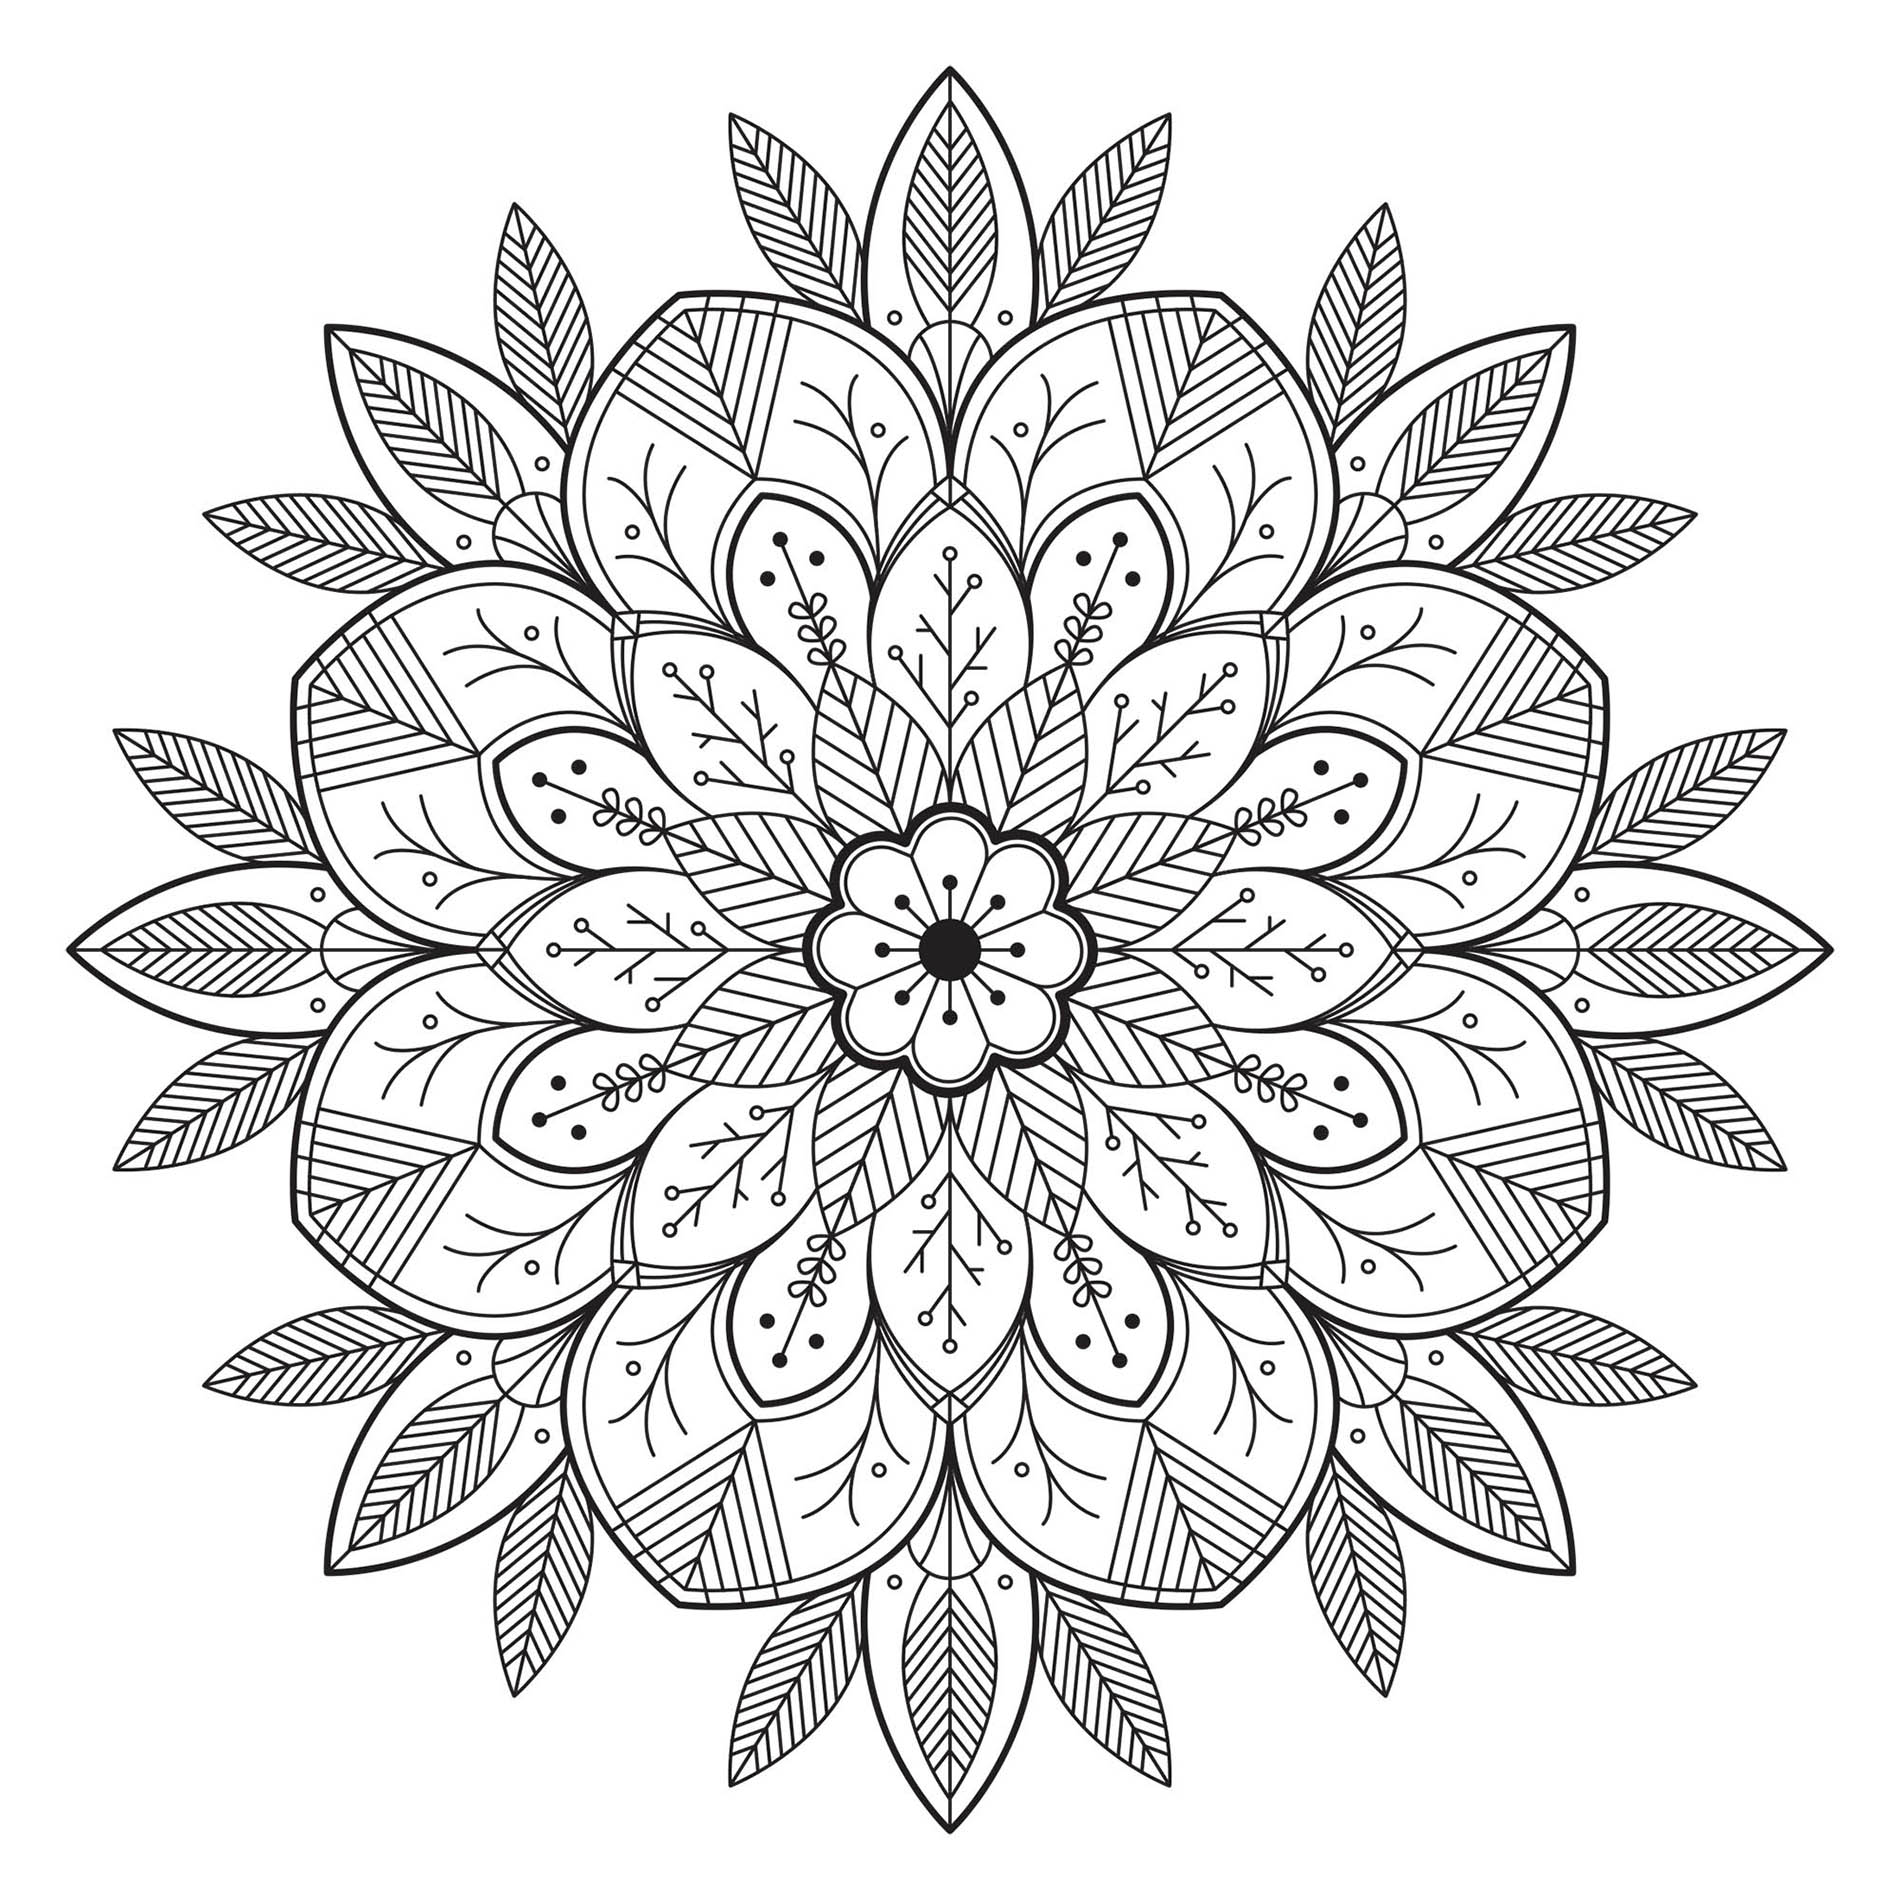 A beautiful Mandala with flowers and leaves